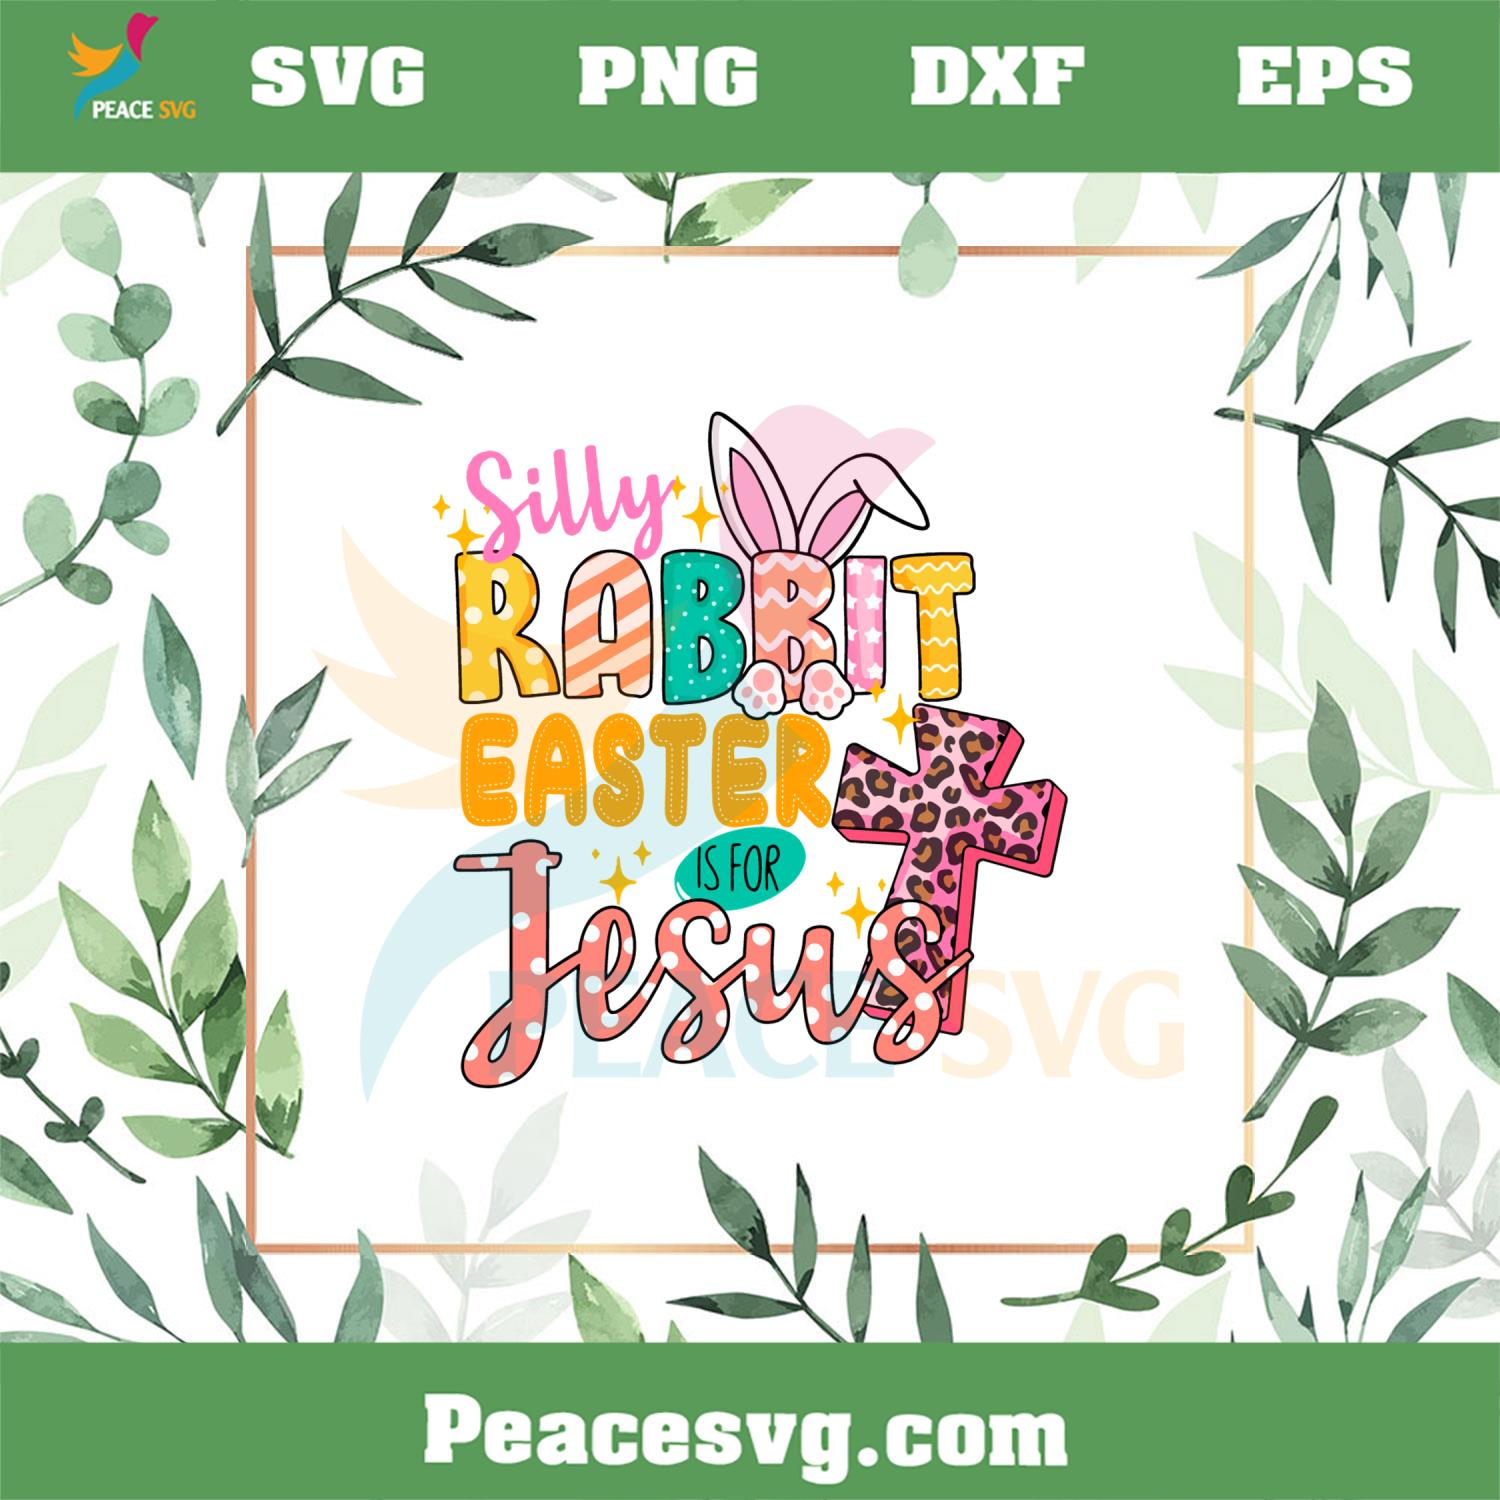 Silly Rabbit Easter If For Jesus Leopard Cross Svg Cutting Files